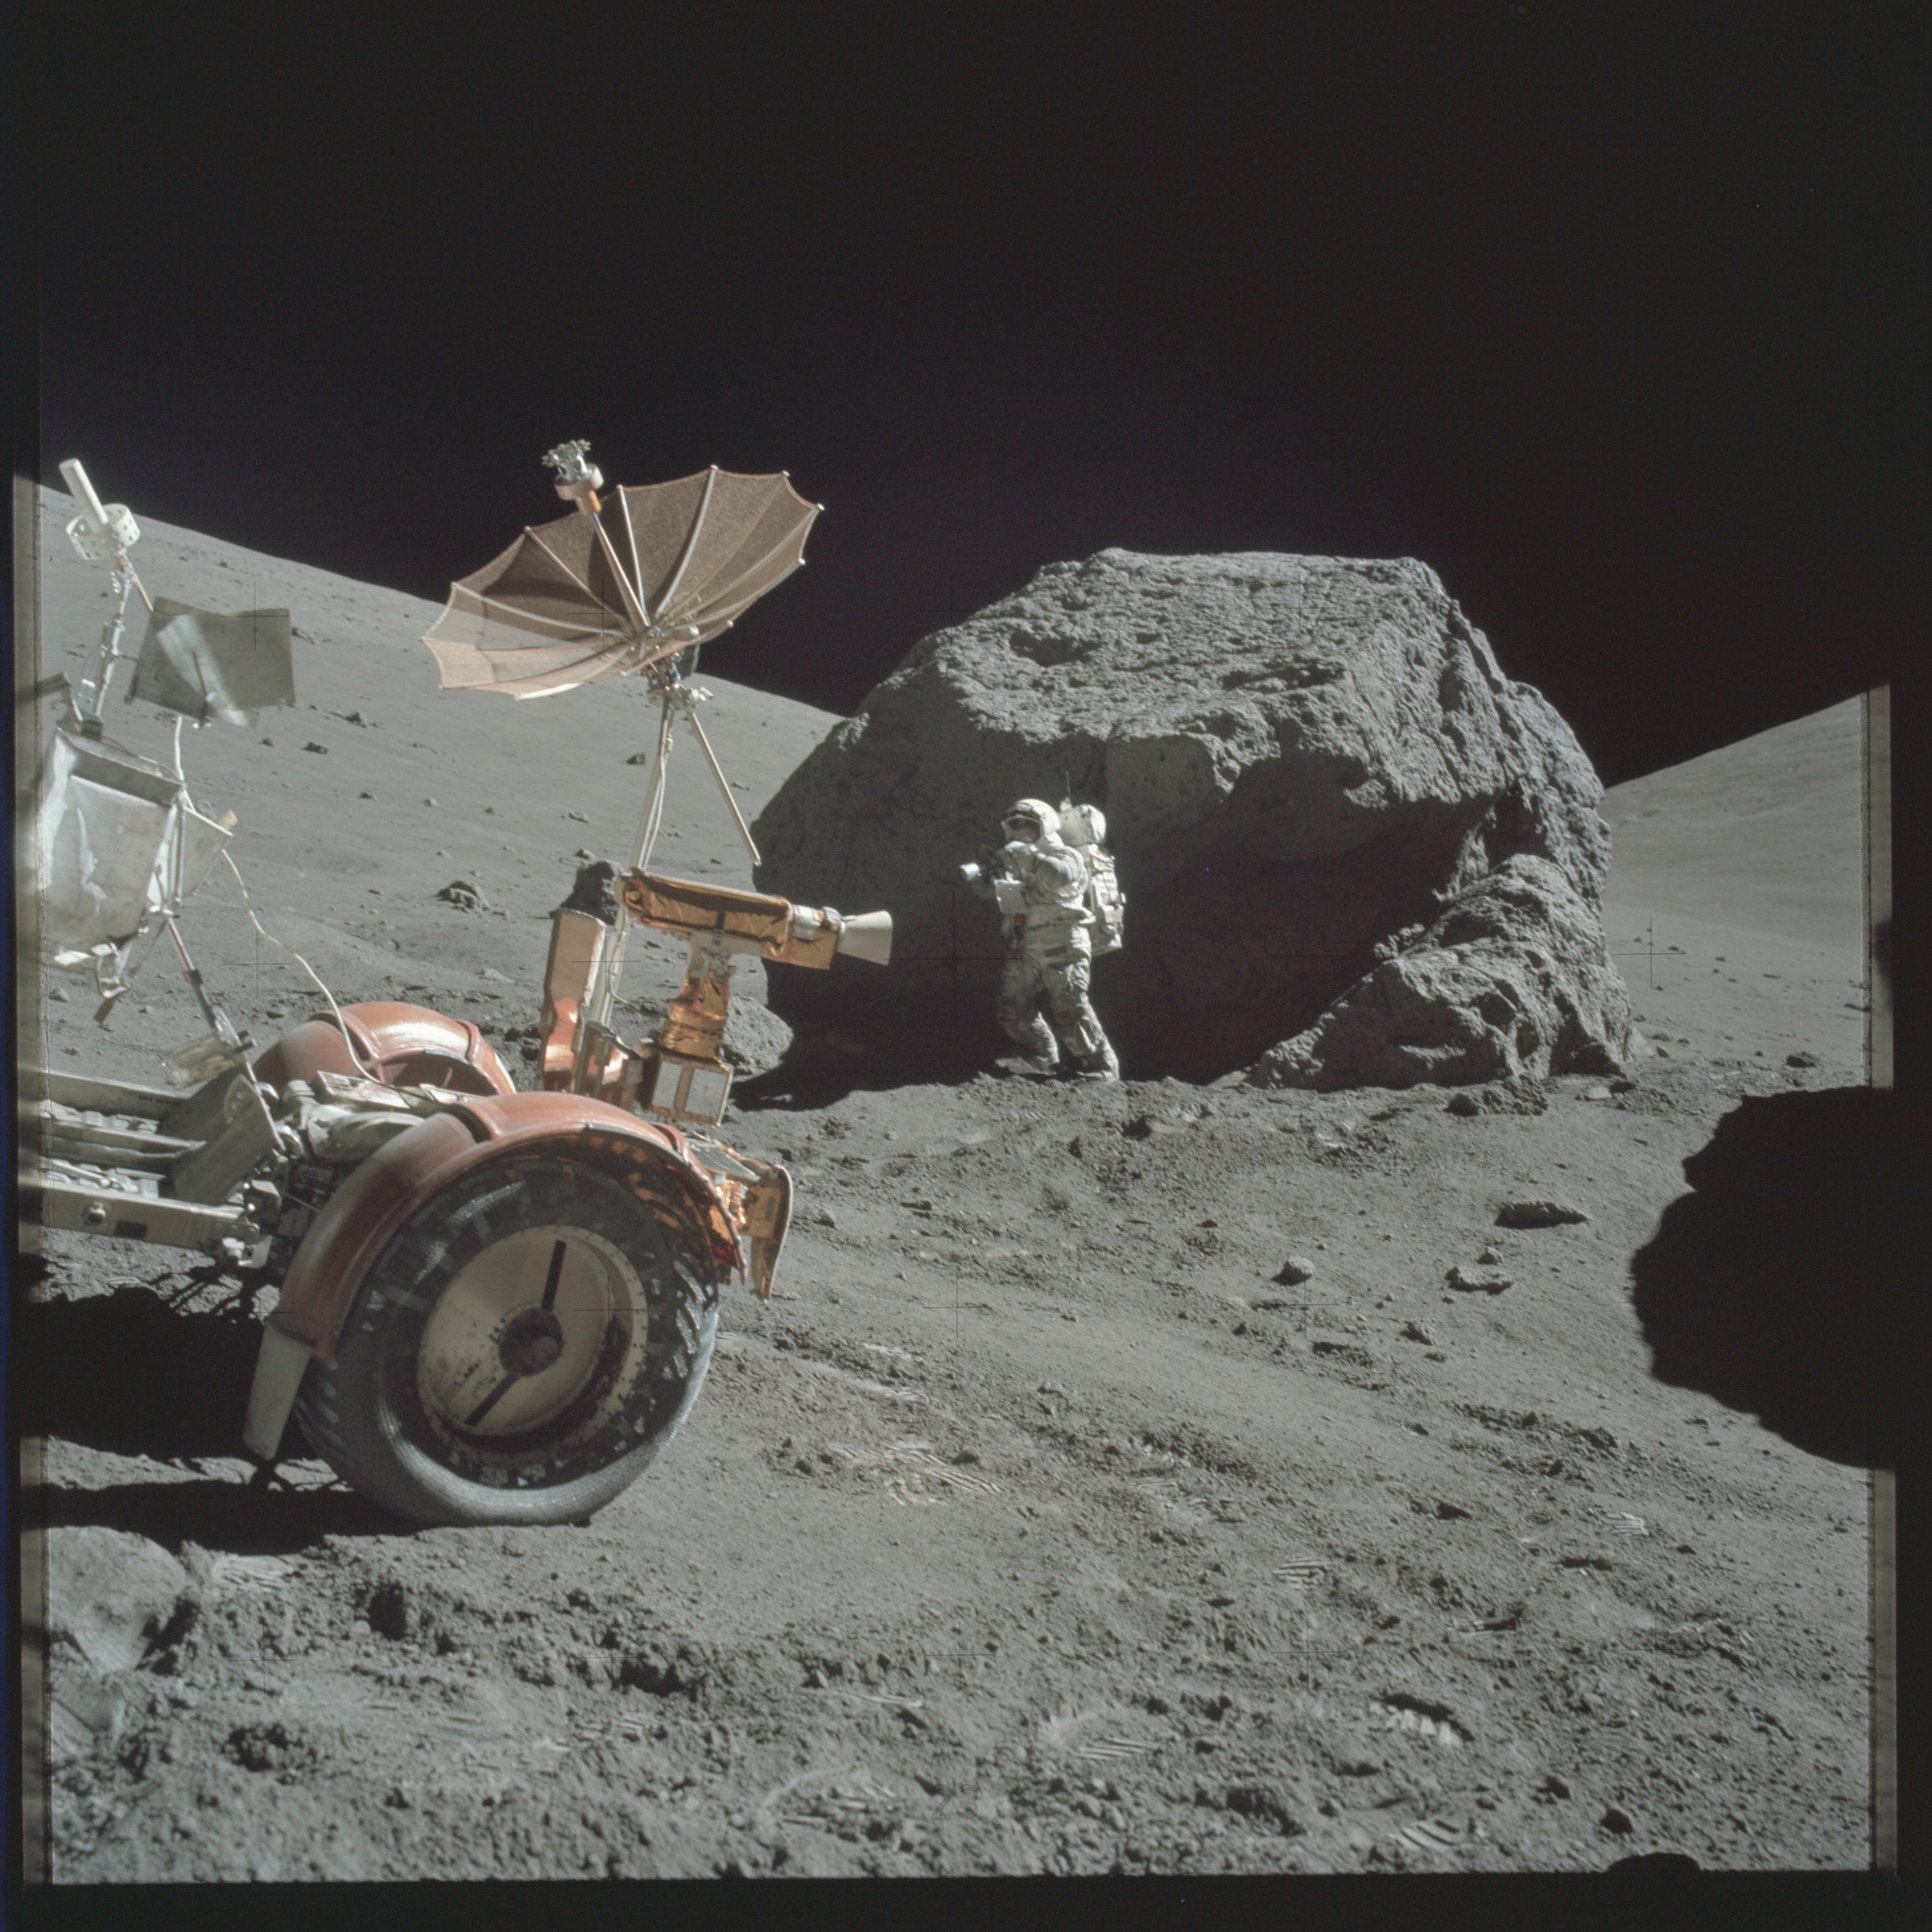 NASA's high-resolution photos from the Moon